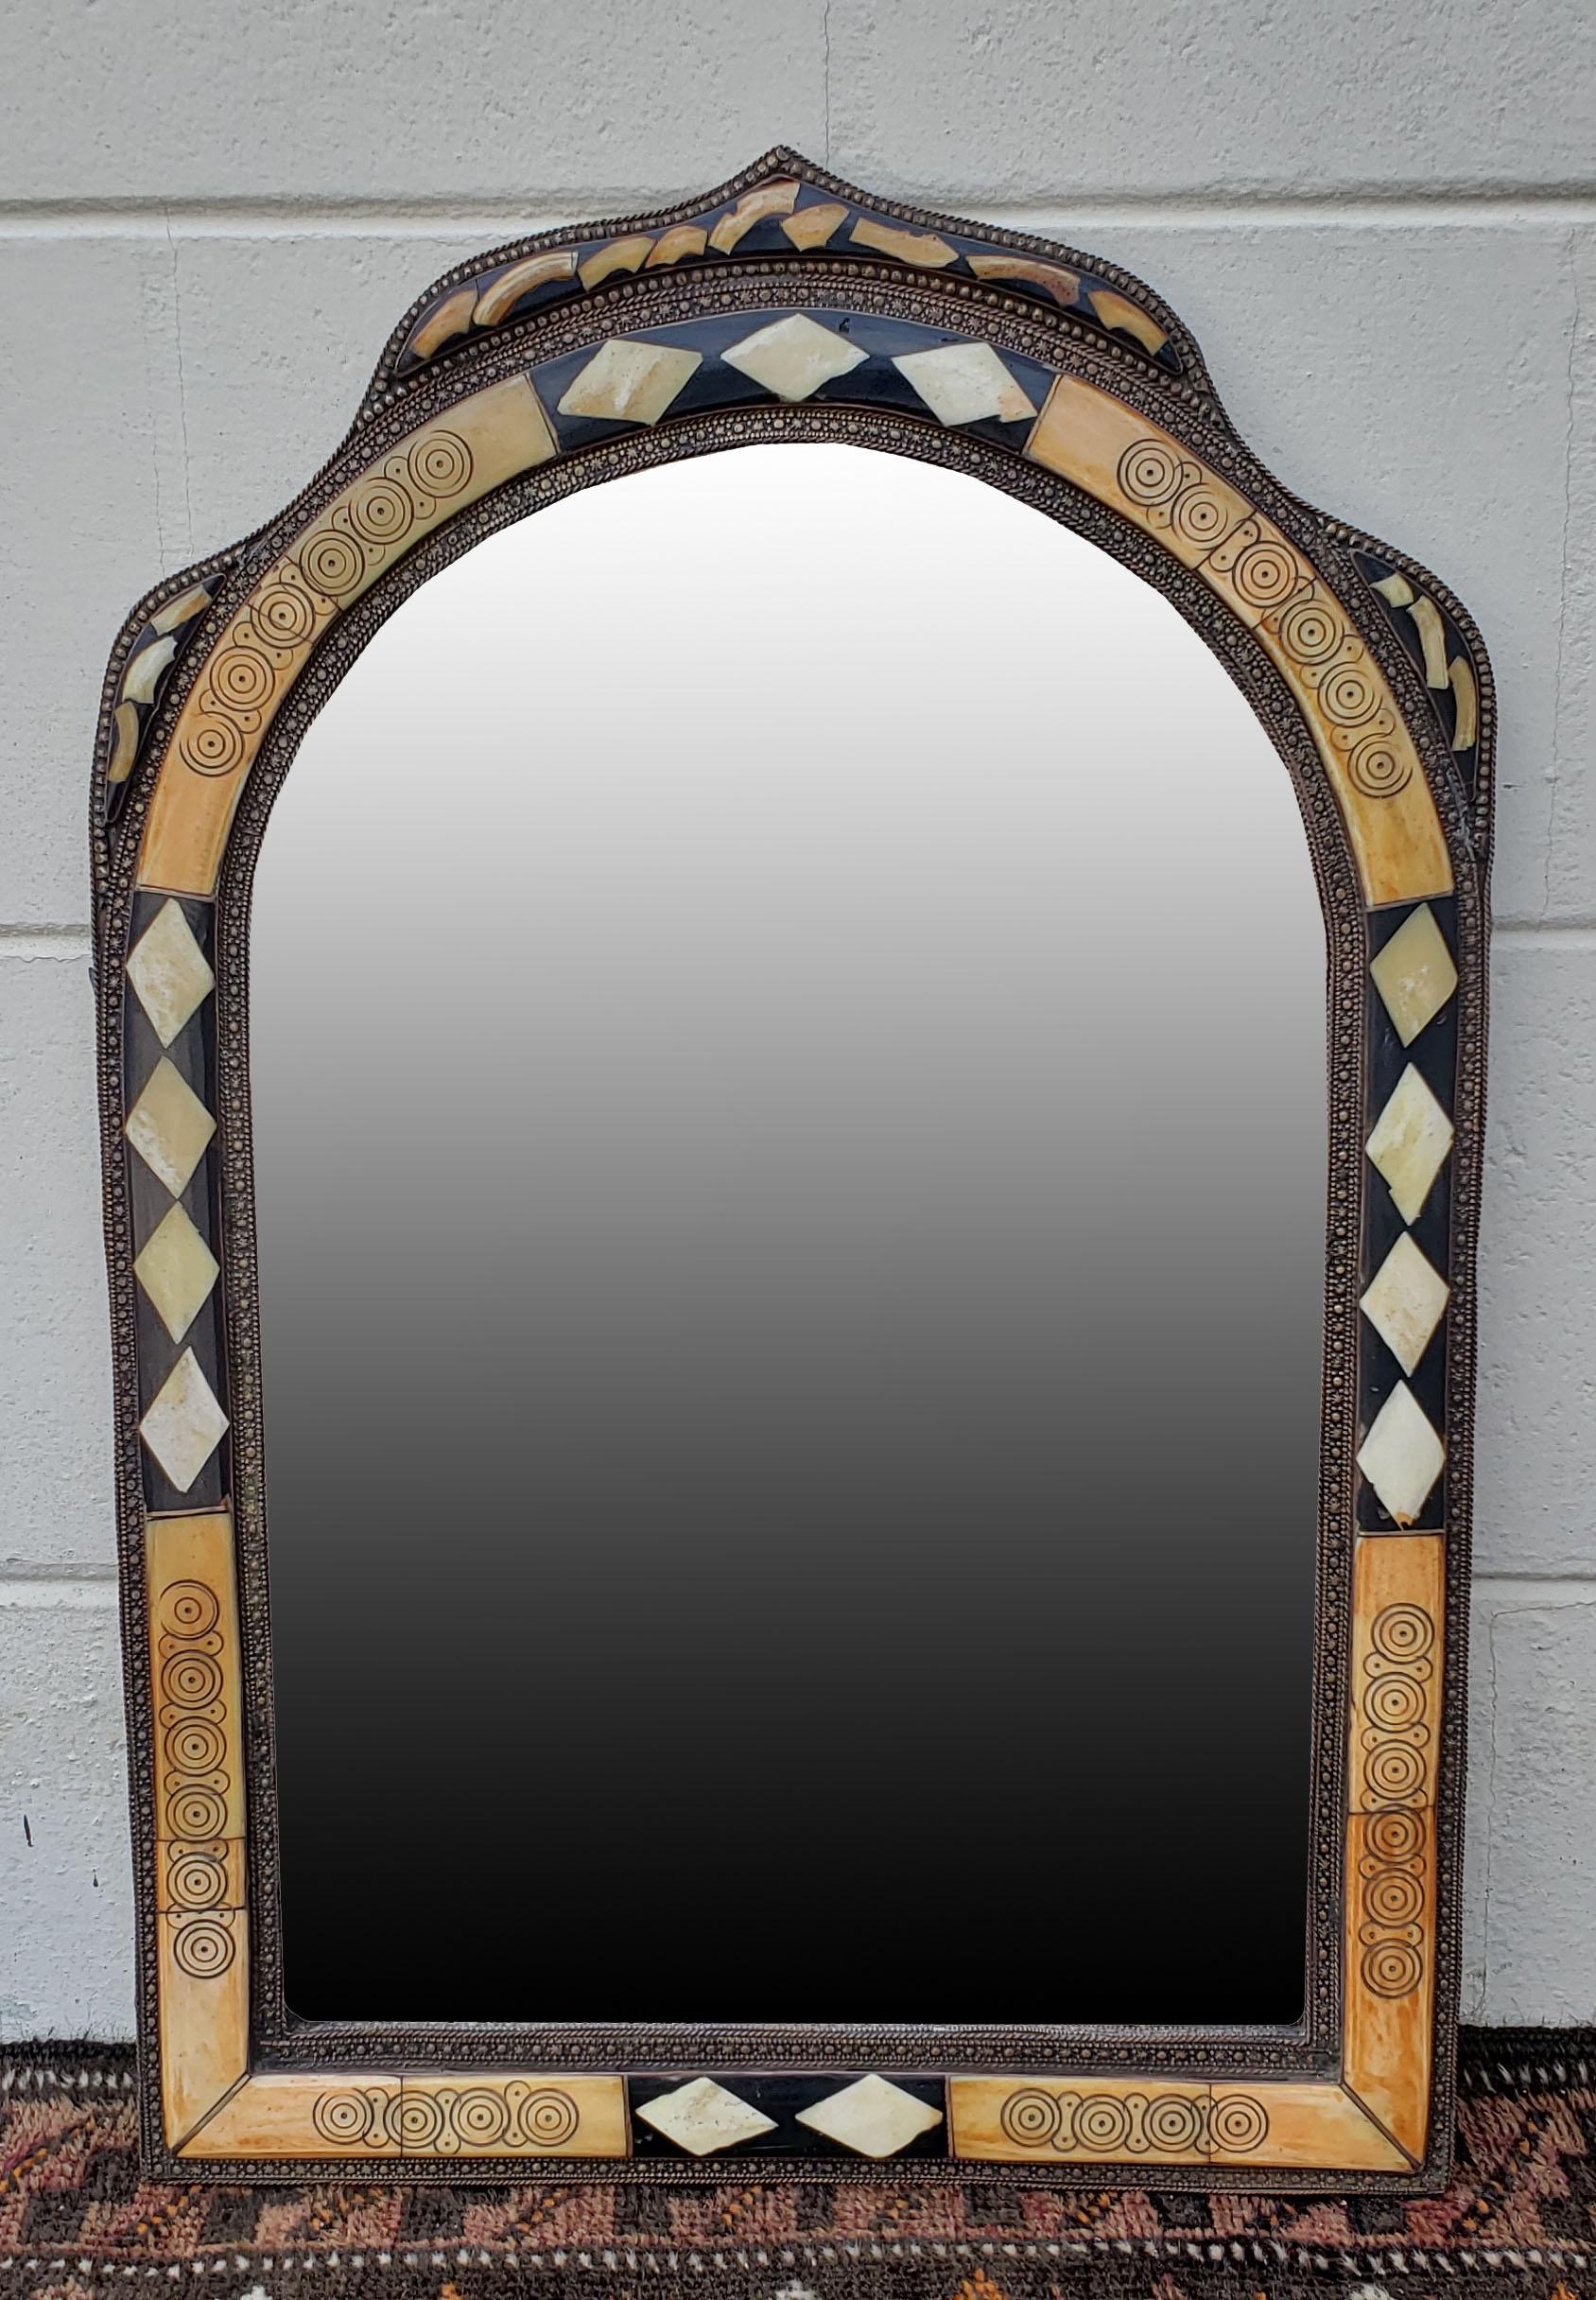 Small size metal and camel bone inlay Moroccan mirror. Made in the city of Marrakech. Rectangular shape with an arched top, and measuring approximately 23